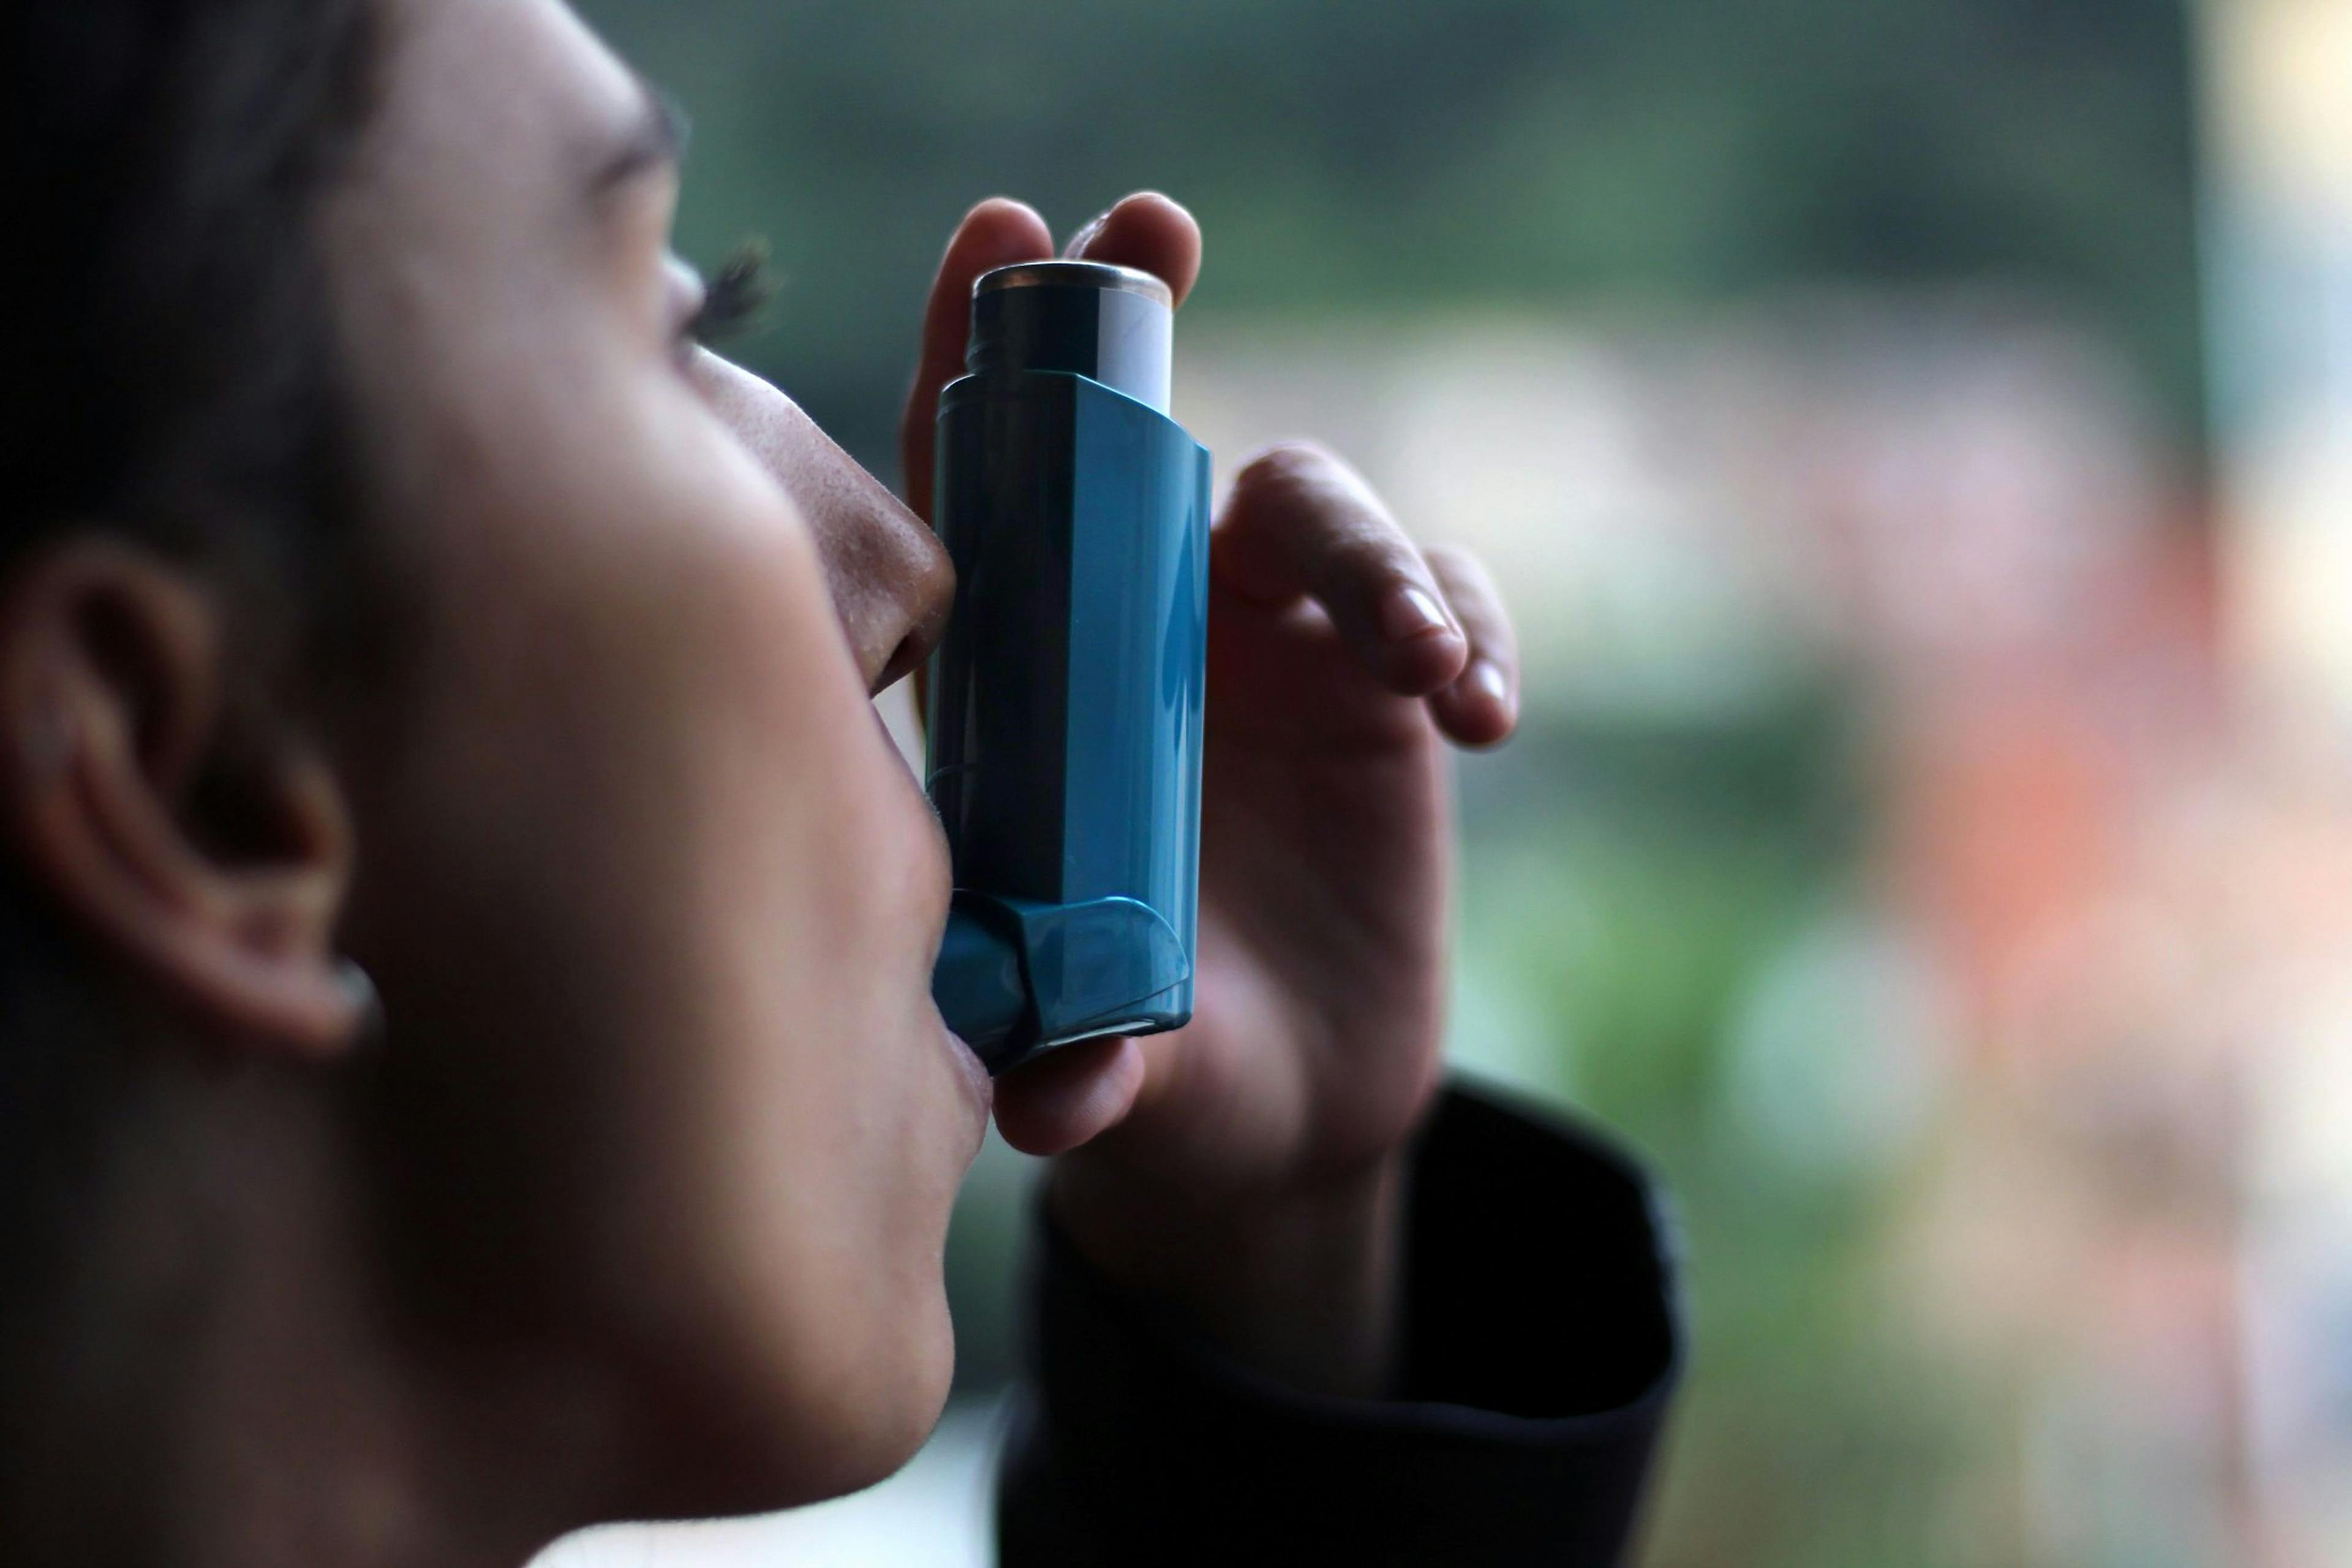 A patient uses an inhaler to prevent an asthma attack | Image Credit: © DALU11 - stock.adobe.com